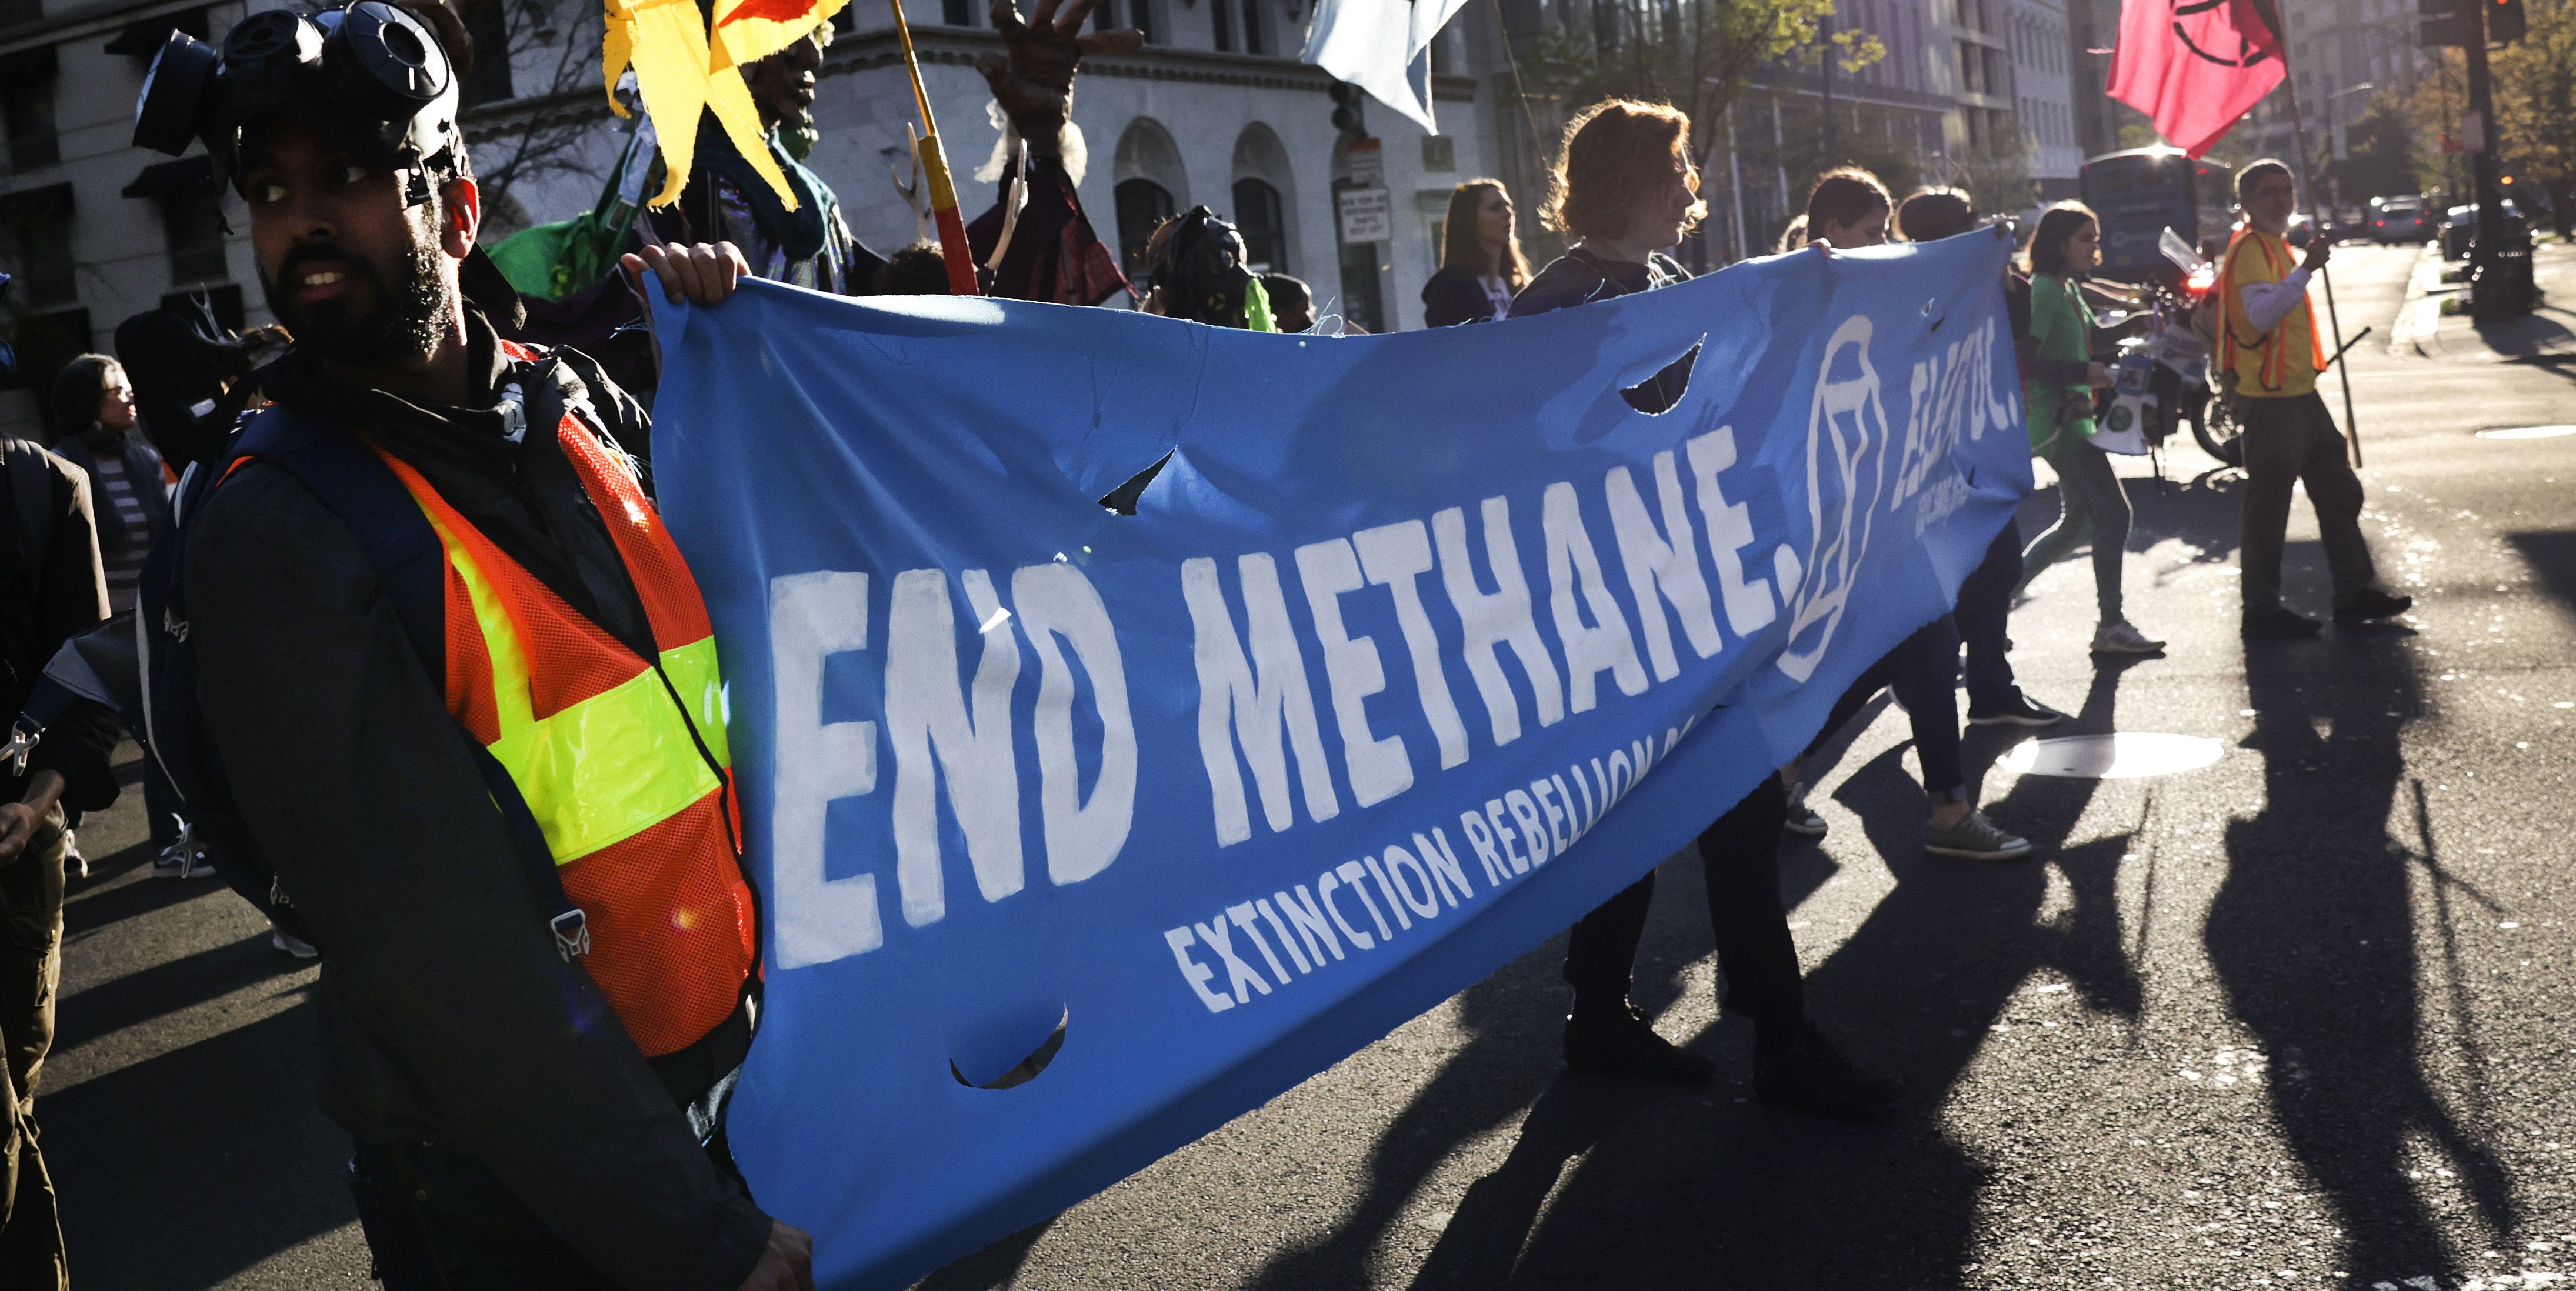 It's Hard to Fight Methane Pollution with One Party Tied Behind Your Back